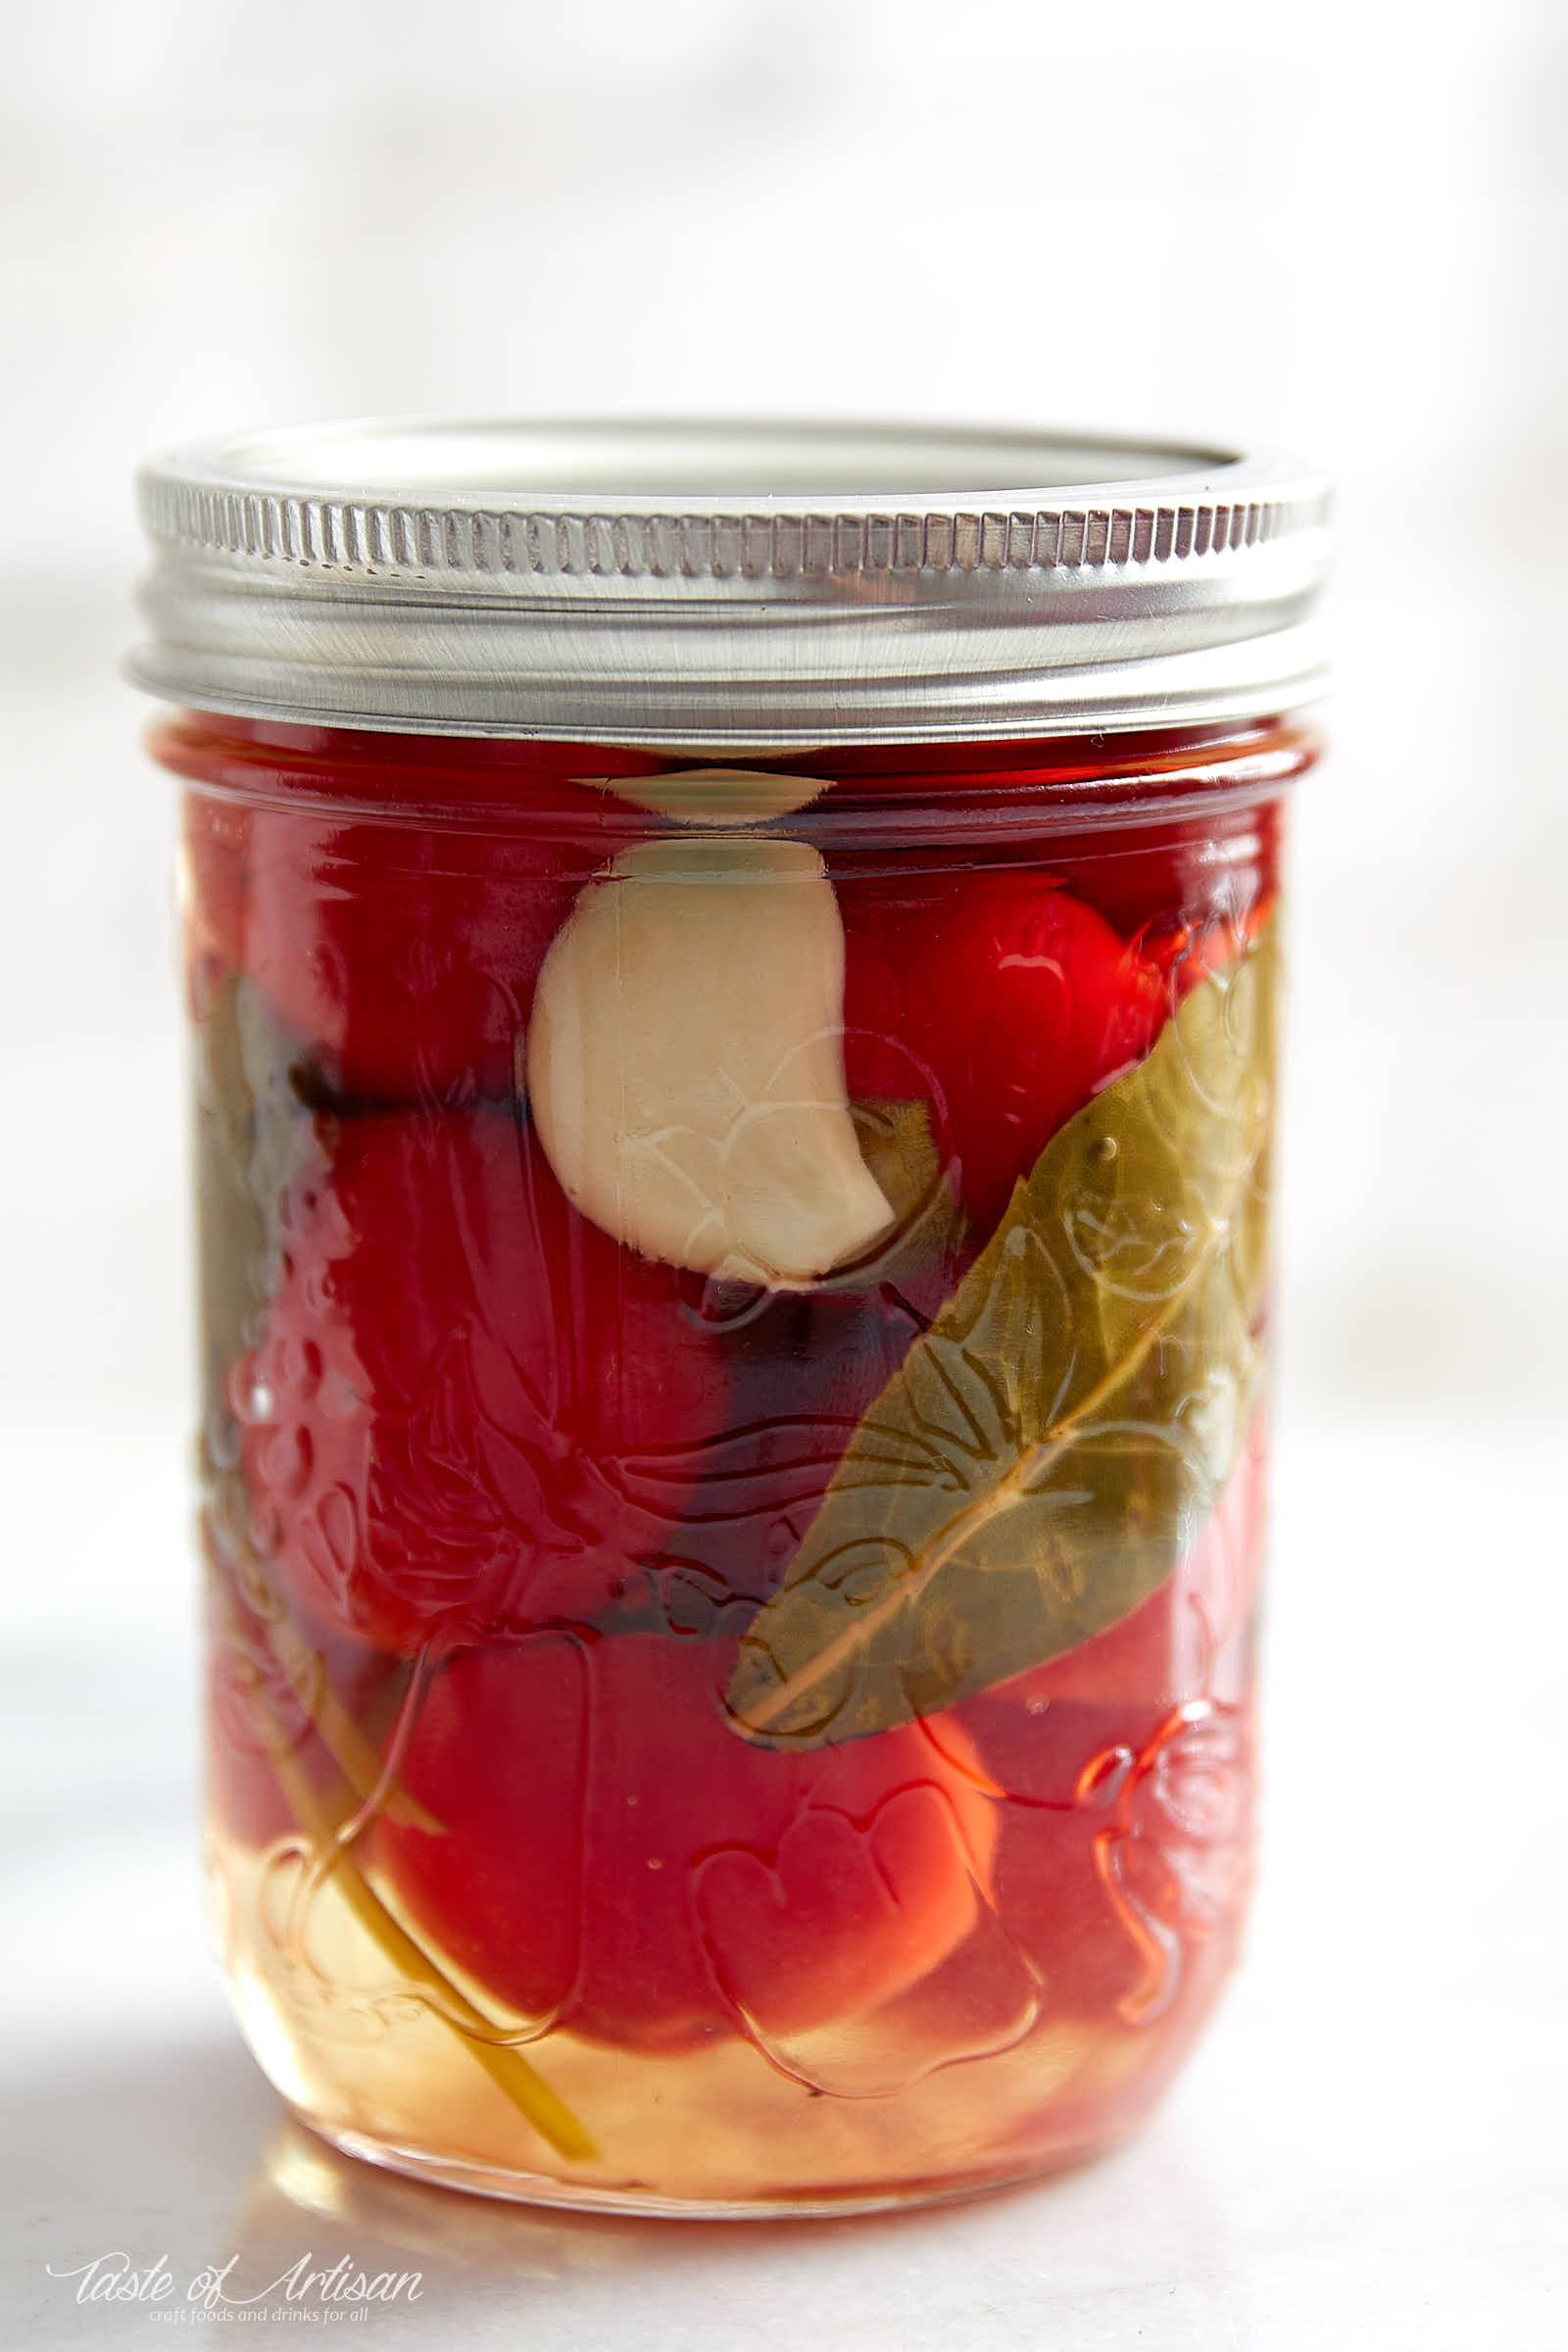 Cherry pepper pickled in a savory, with just a touch of sweetness, pickling liquid.